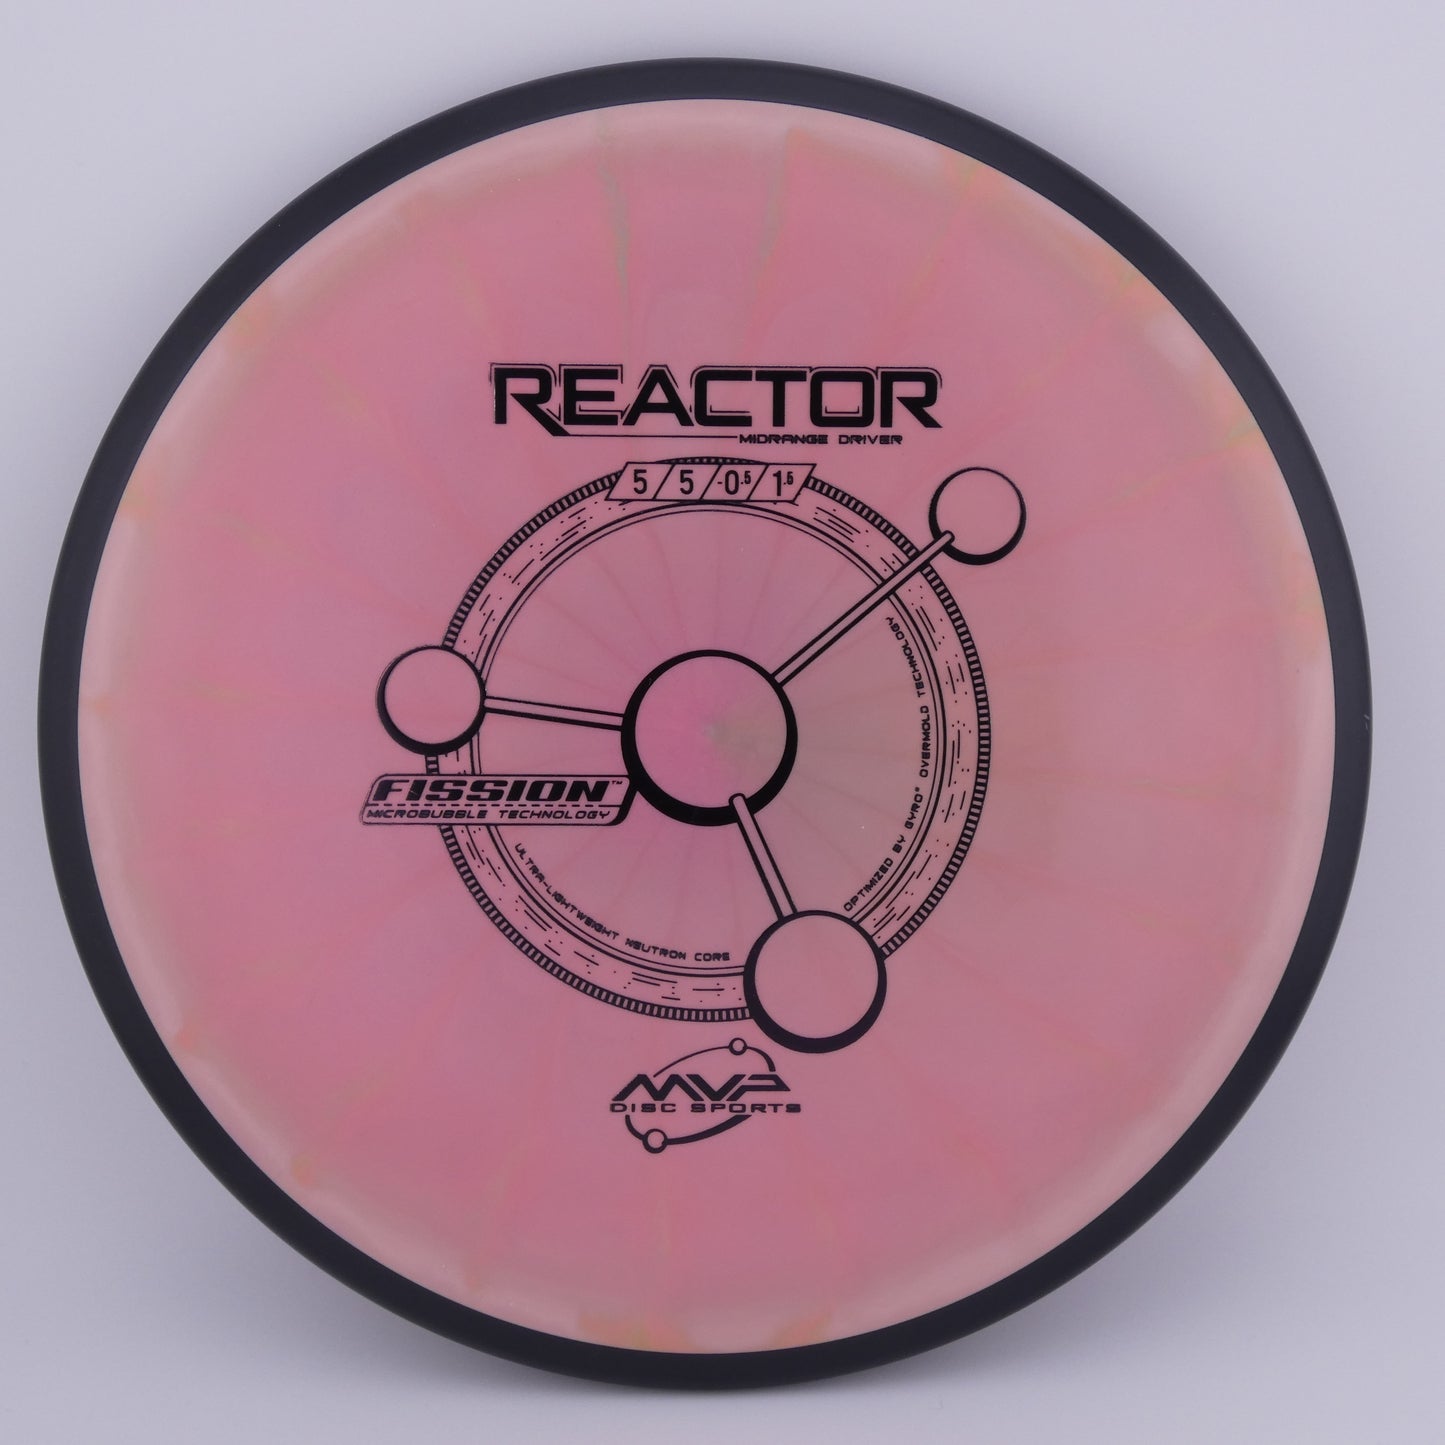 Fission Reactor 155-159g